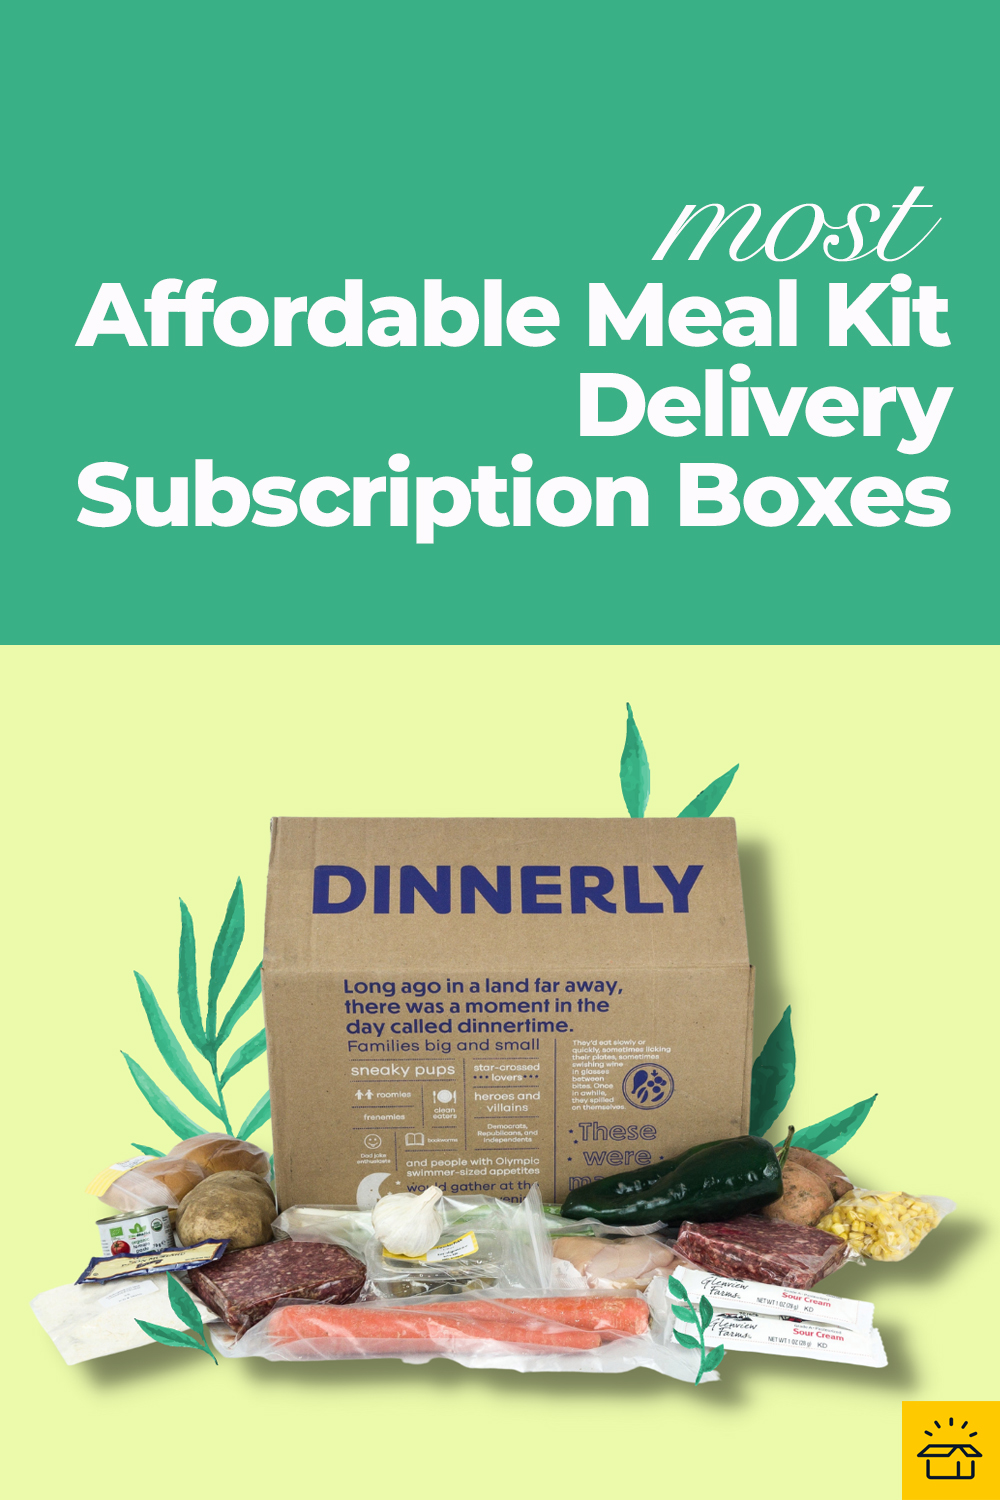 Affordable meal subscriptions